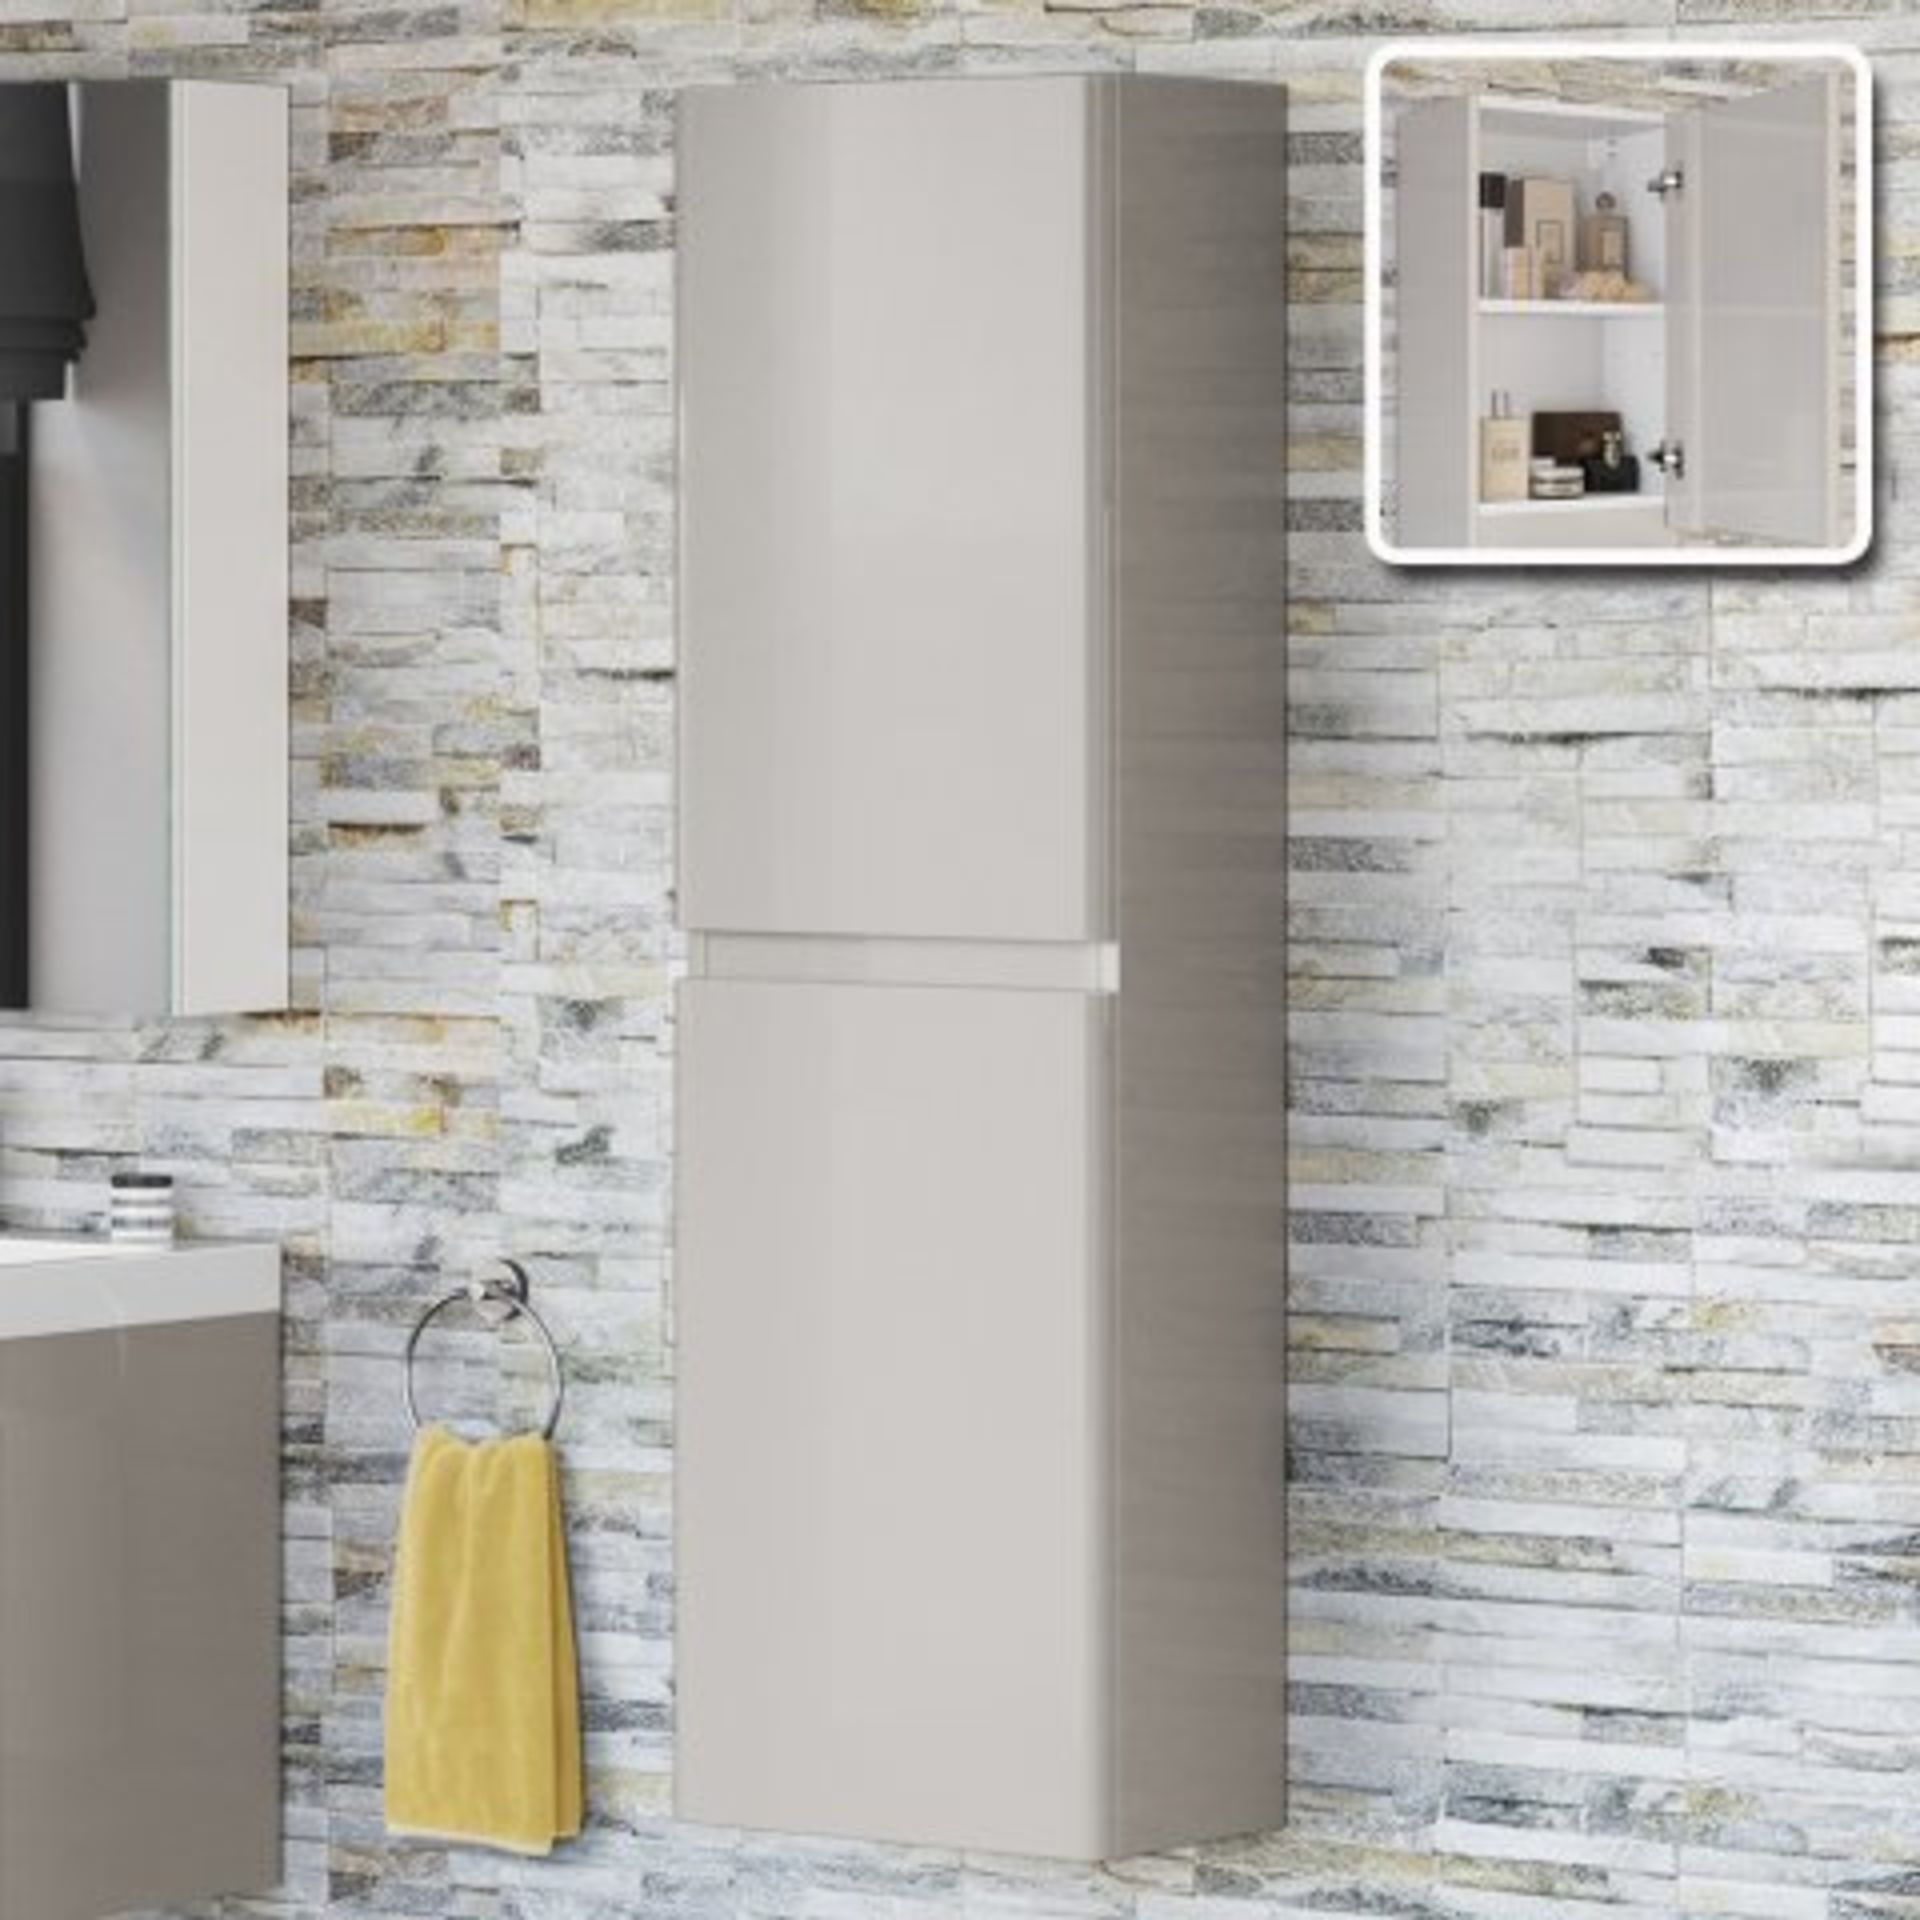 (P213) 1400mm Denver II Gloss Latte Tall Storage Cabinet - Wall Hung. RRP £299.99. With its